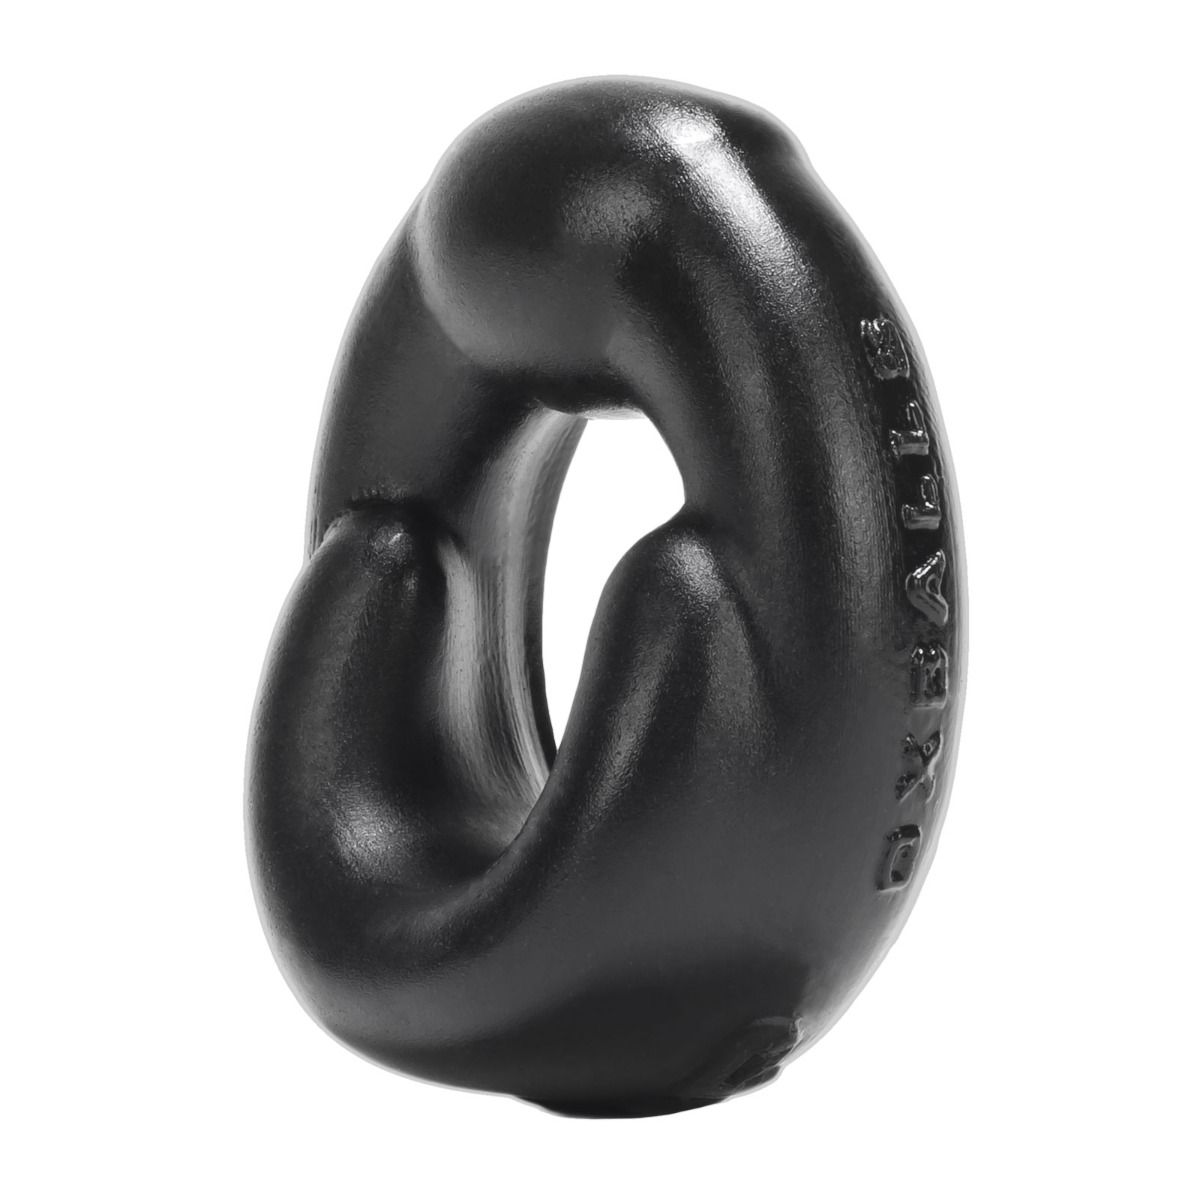 Prowler RED By Oxballs GRIP Cock Ring Black - Simply Pleasure